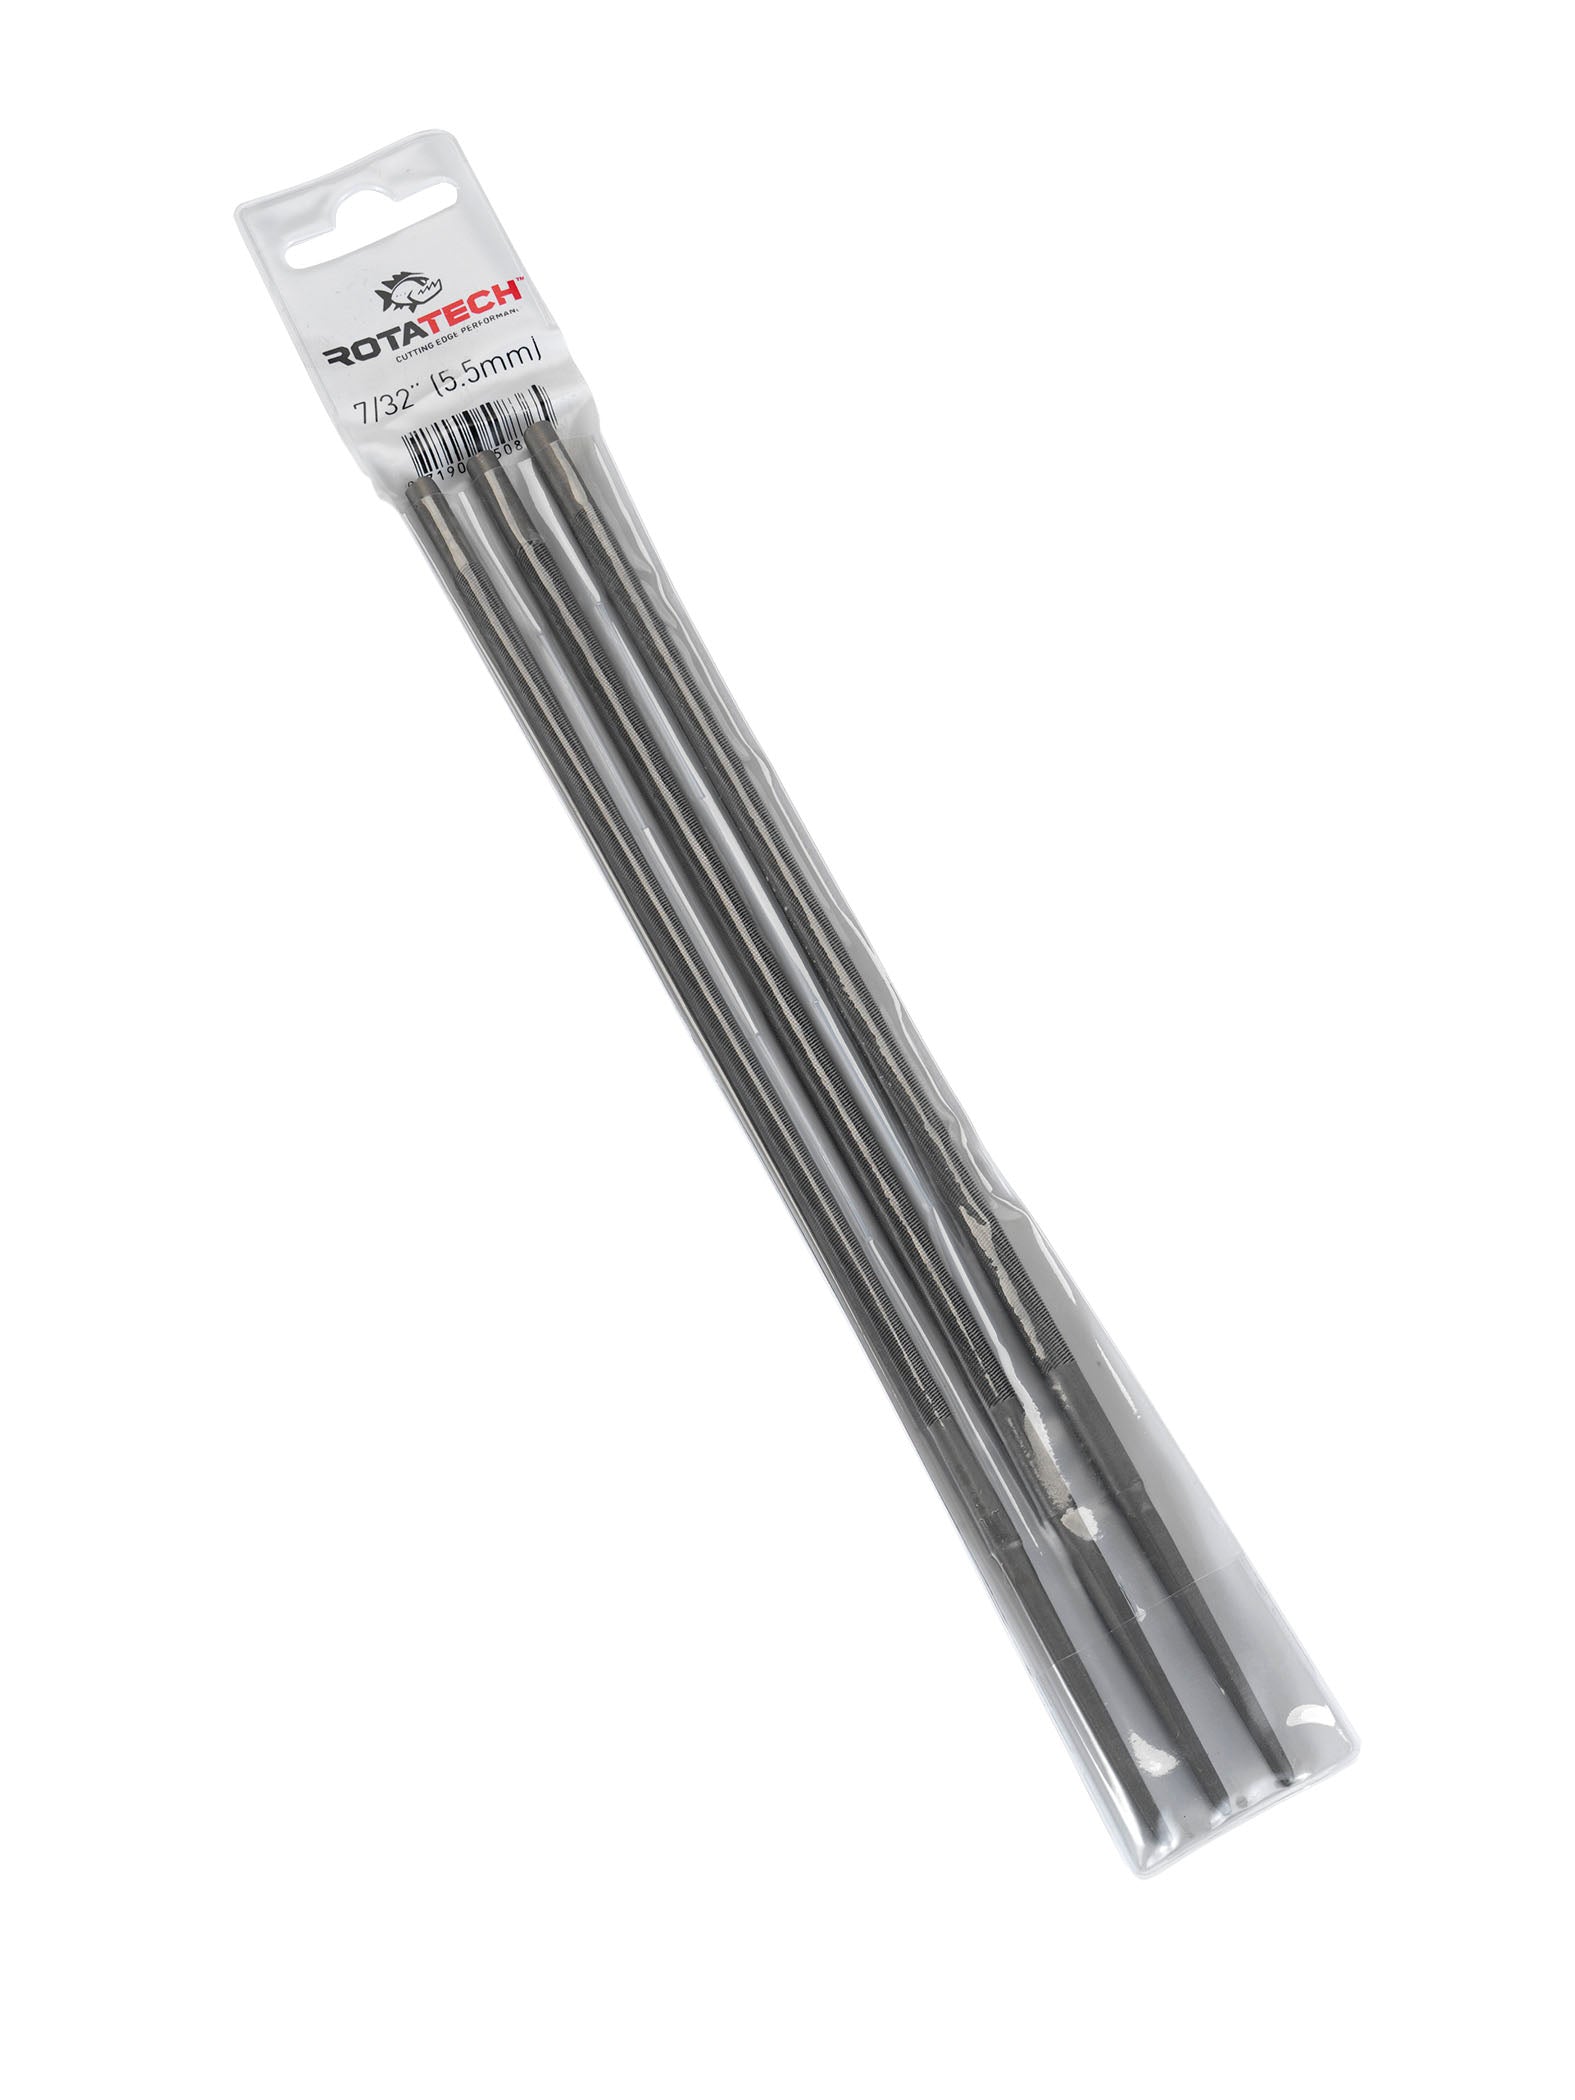 Rotatech 3/16" Round Chainsaw Files Pack Of 3